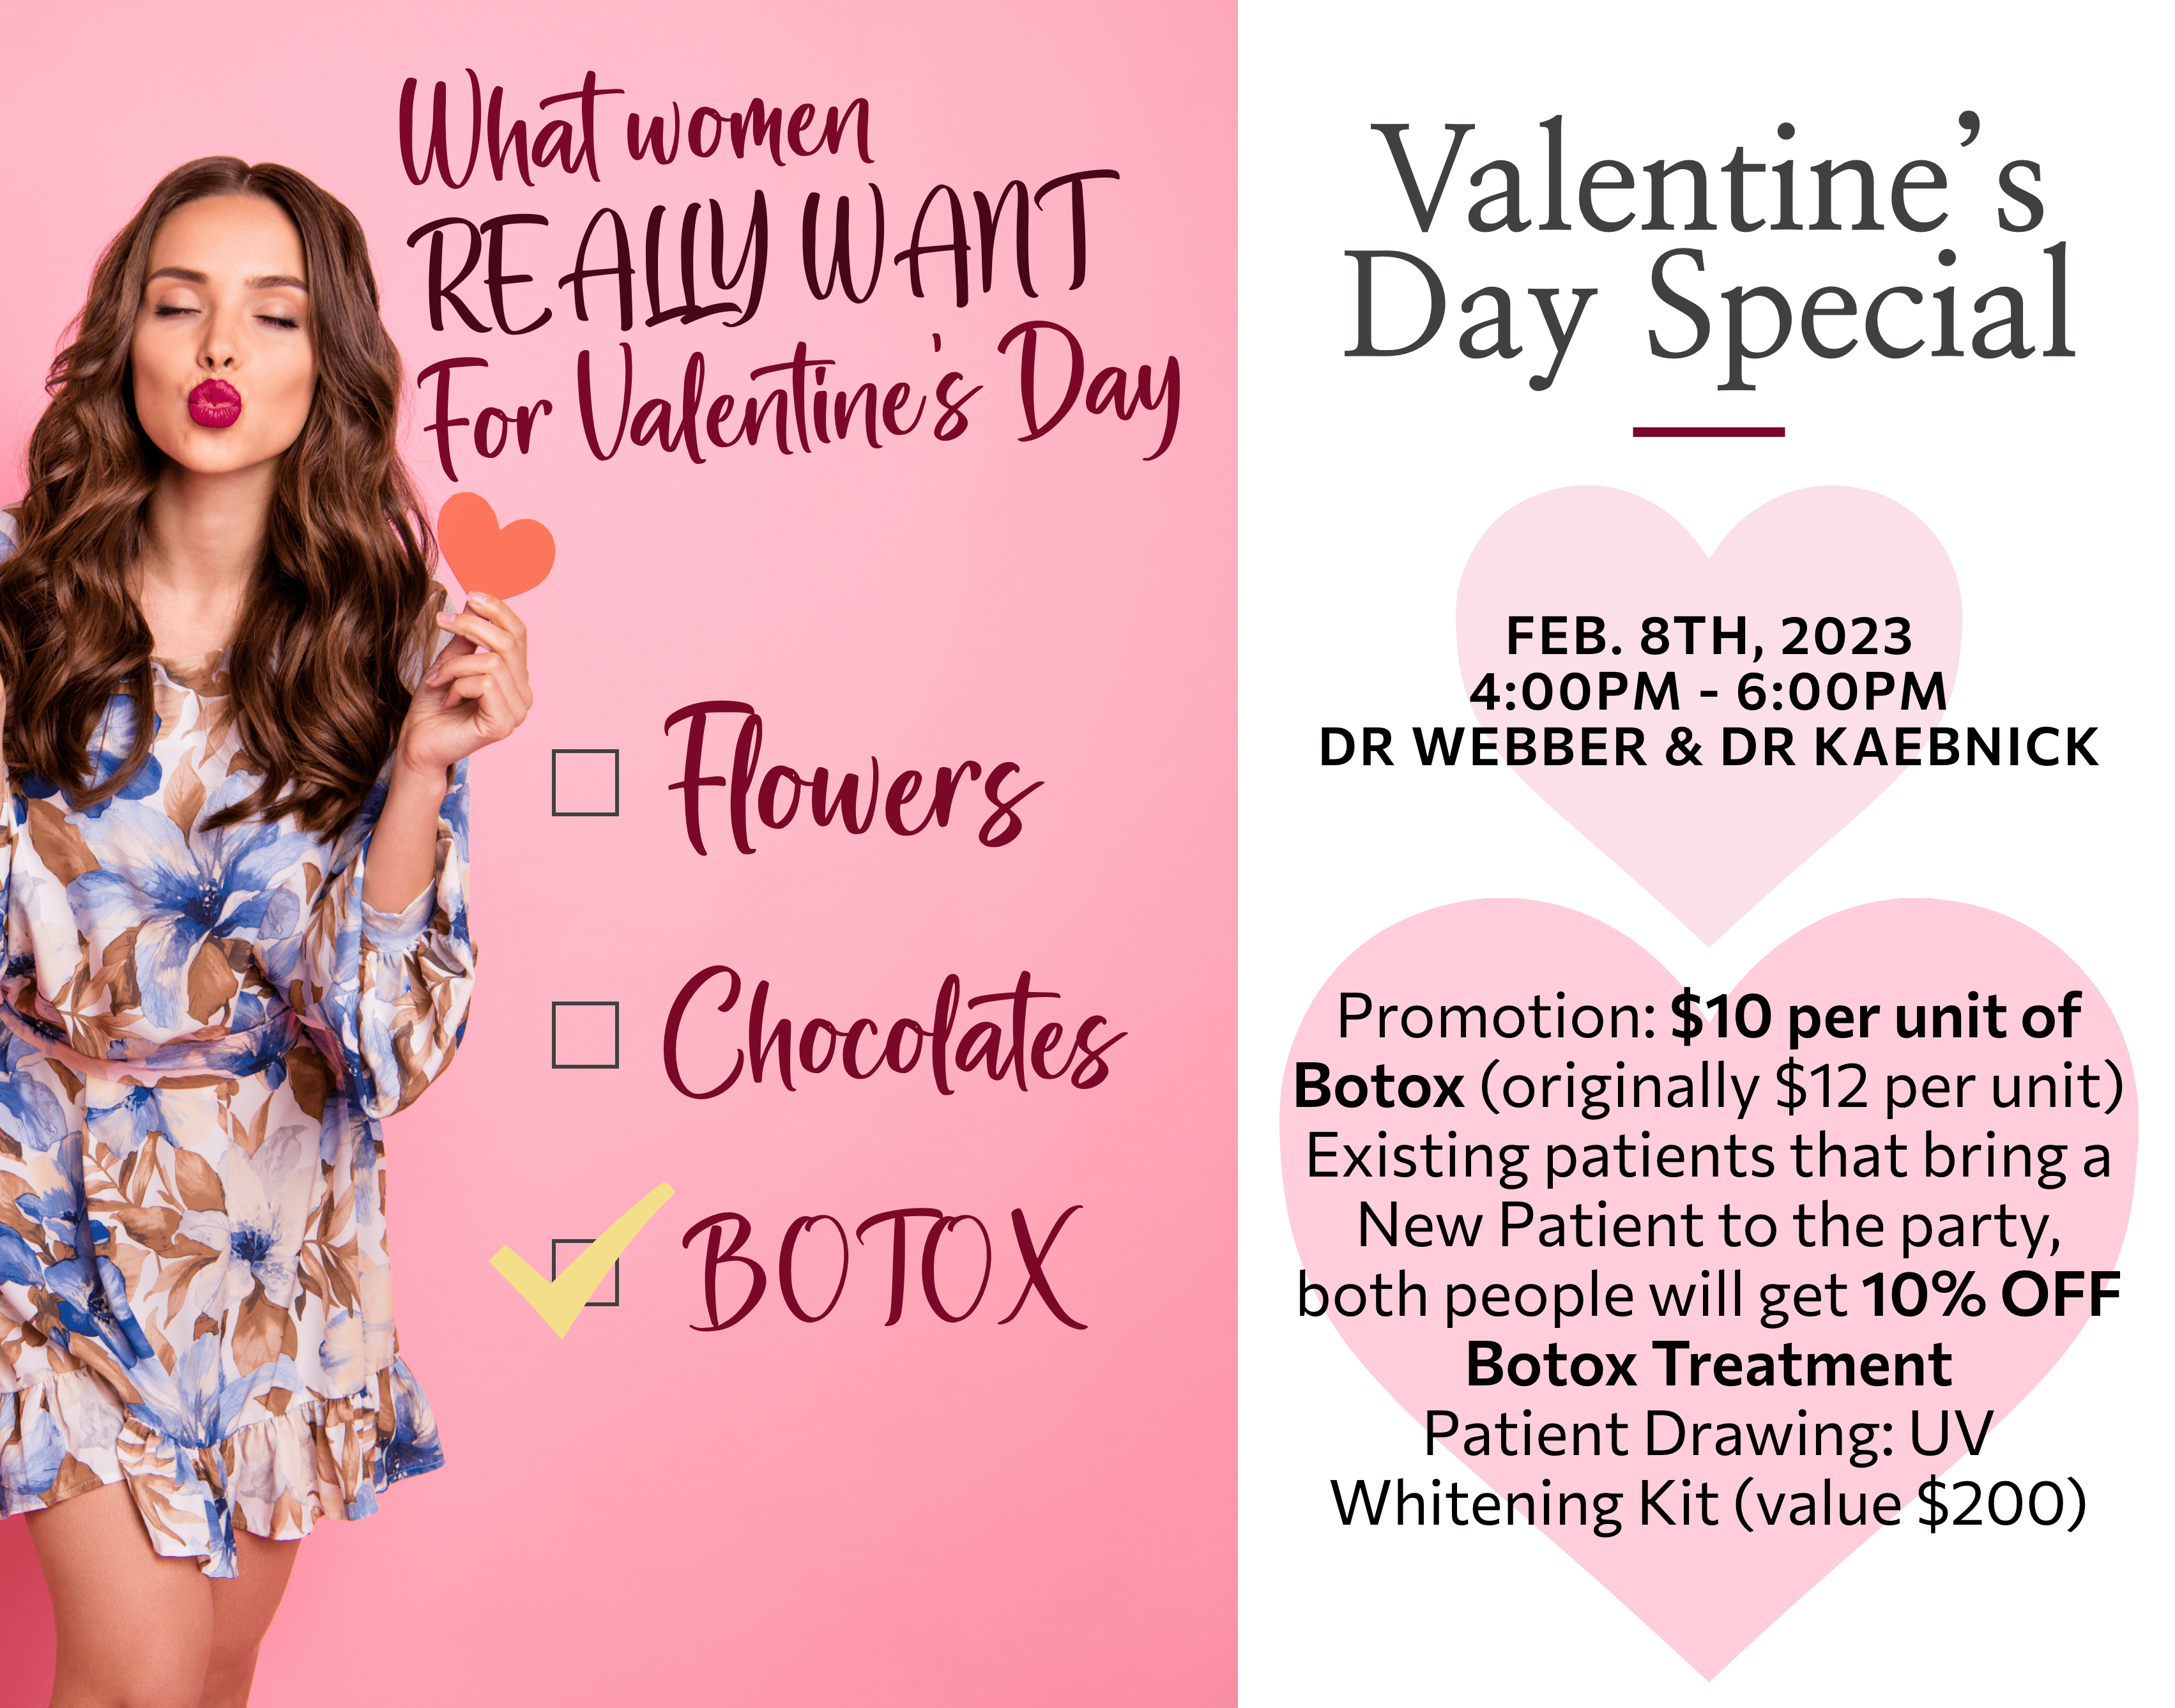 Flyer for BOTOX as a Valentine's Day present